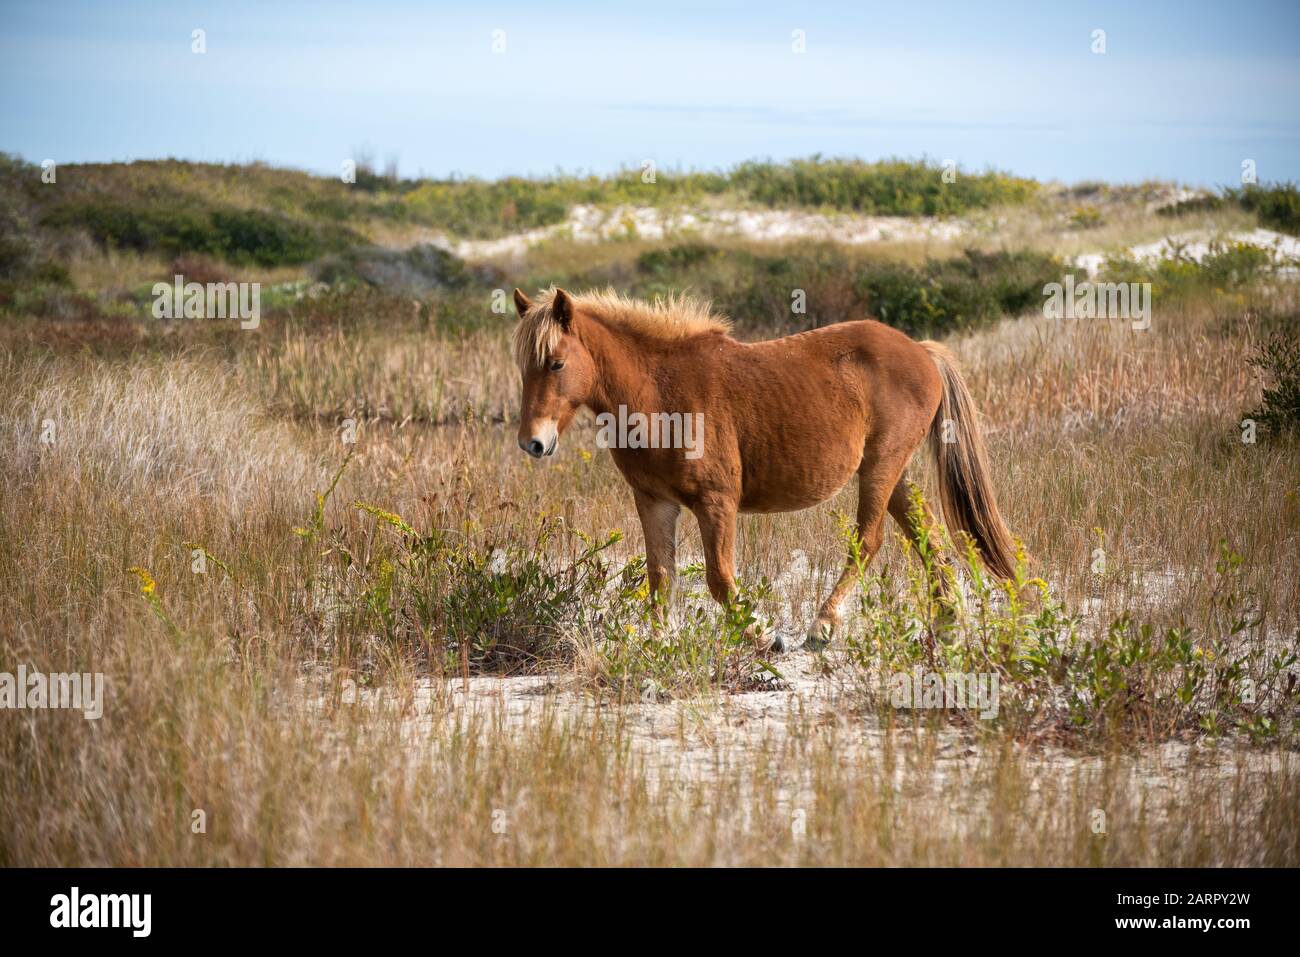 View of a wild horse surrounded by autumn foliage at Assateague National Seashore, located on the eastern shore of Maryland, USA. Stock Photo